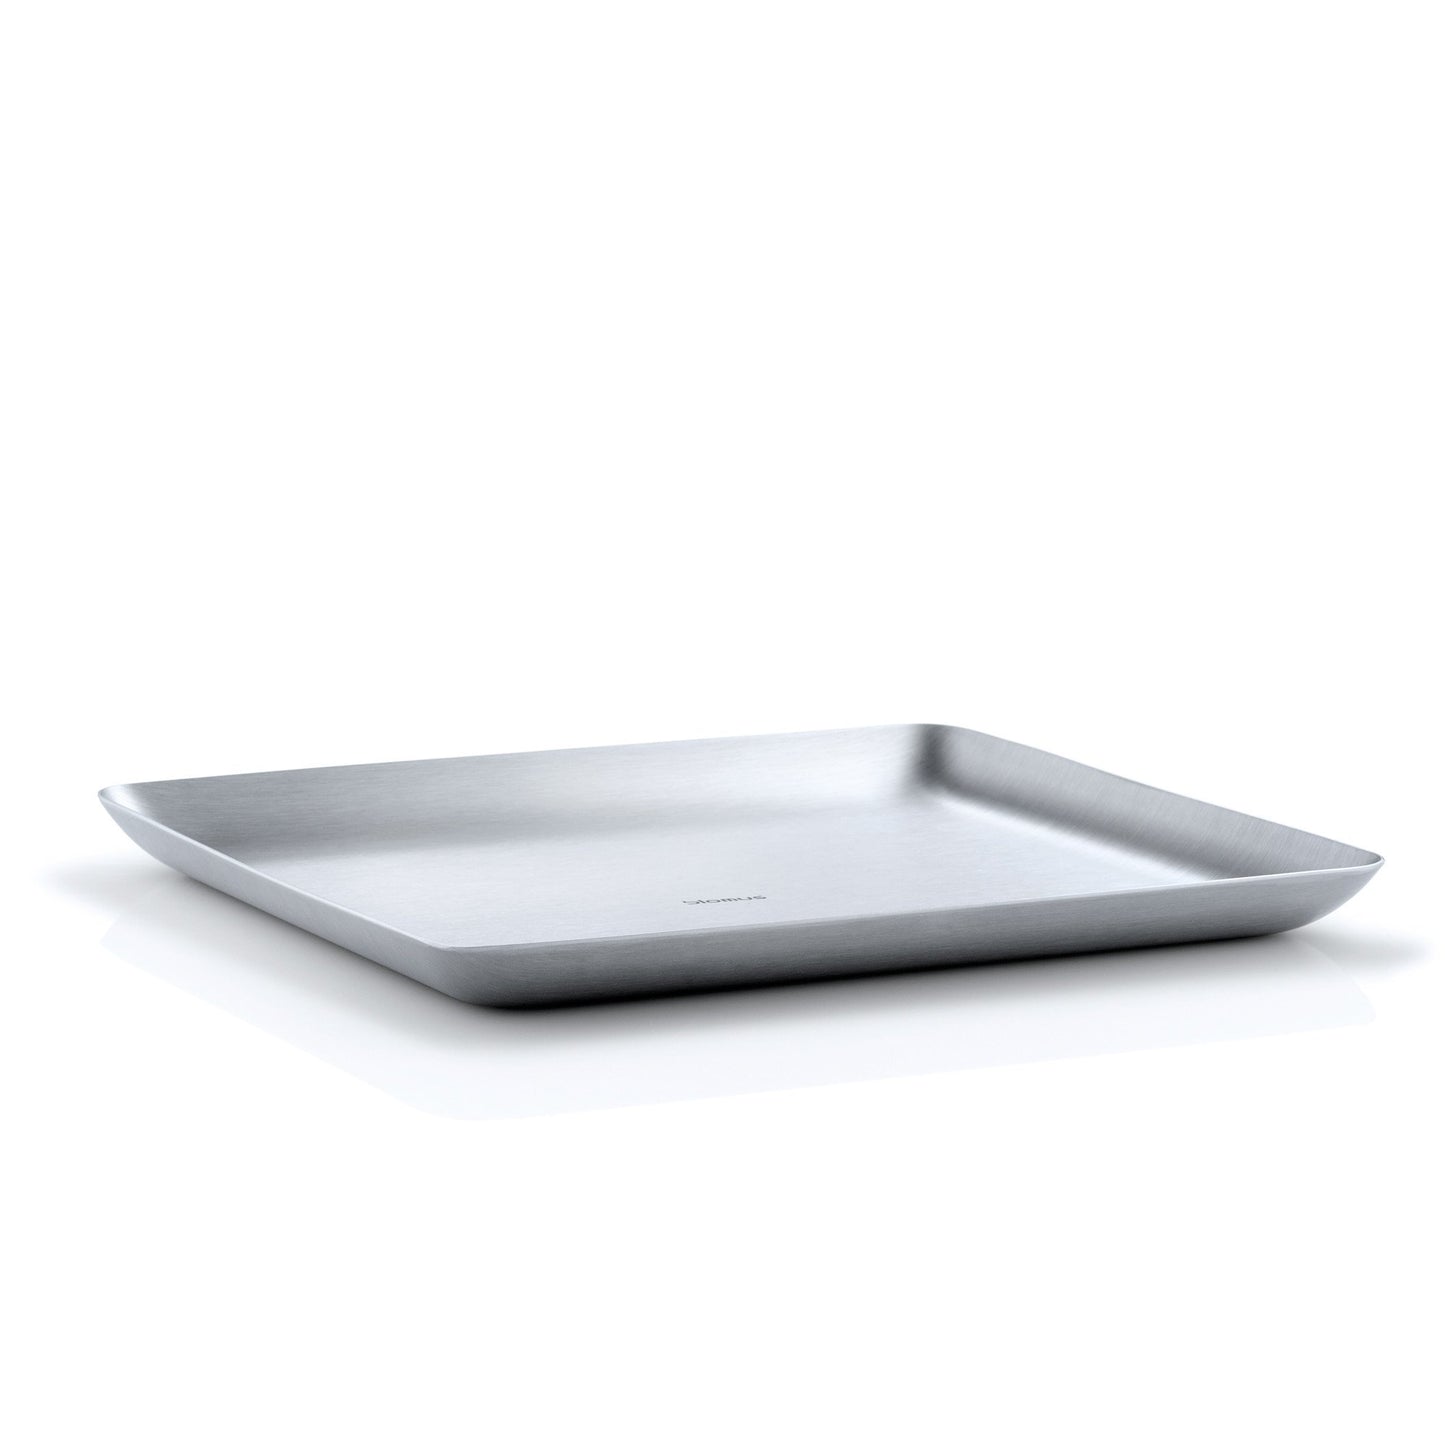 Blomus Basic Tray Stainless Steel 7x8 inches